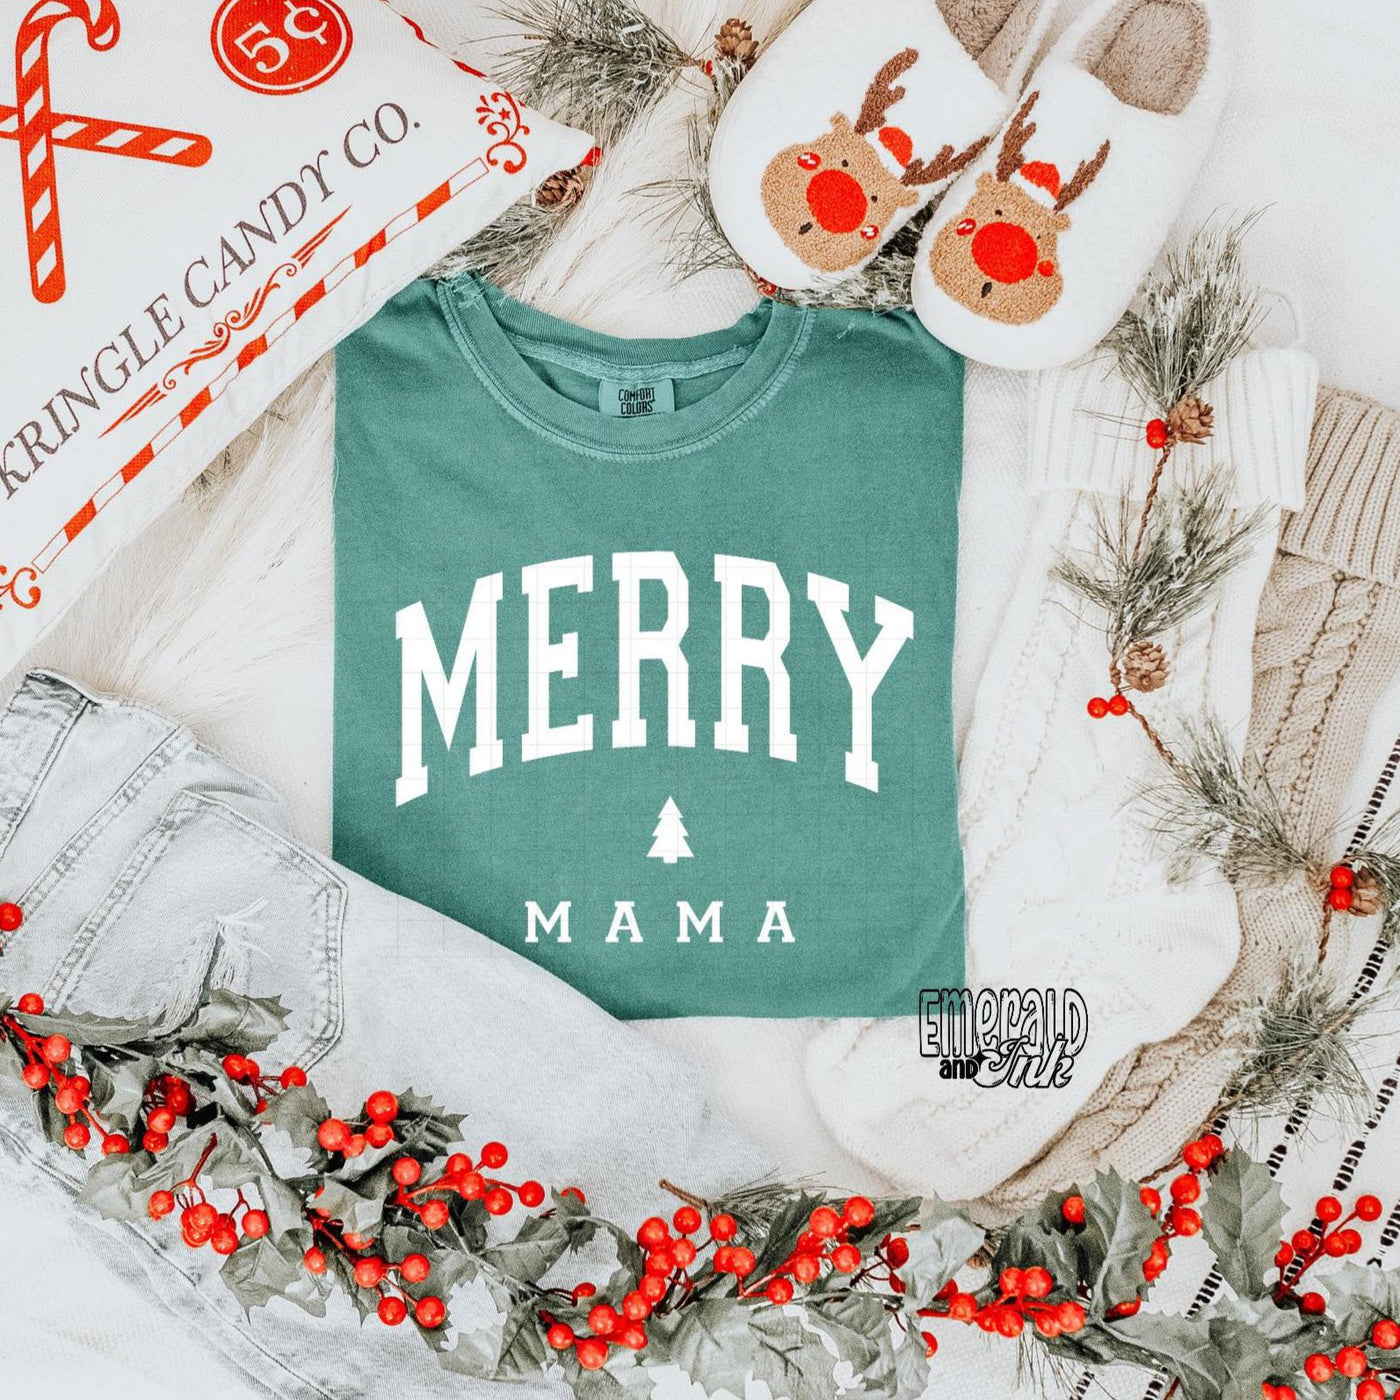 "Merry Mama / Mini" Adult or Toddler/Youth T-shirt (Shown on Comfort Colors)